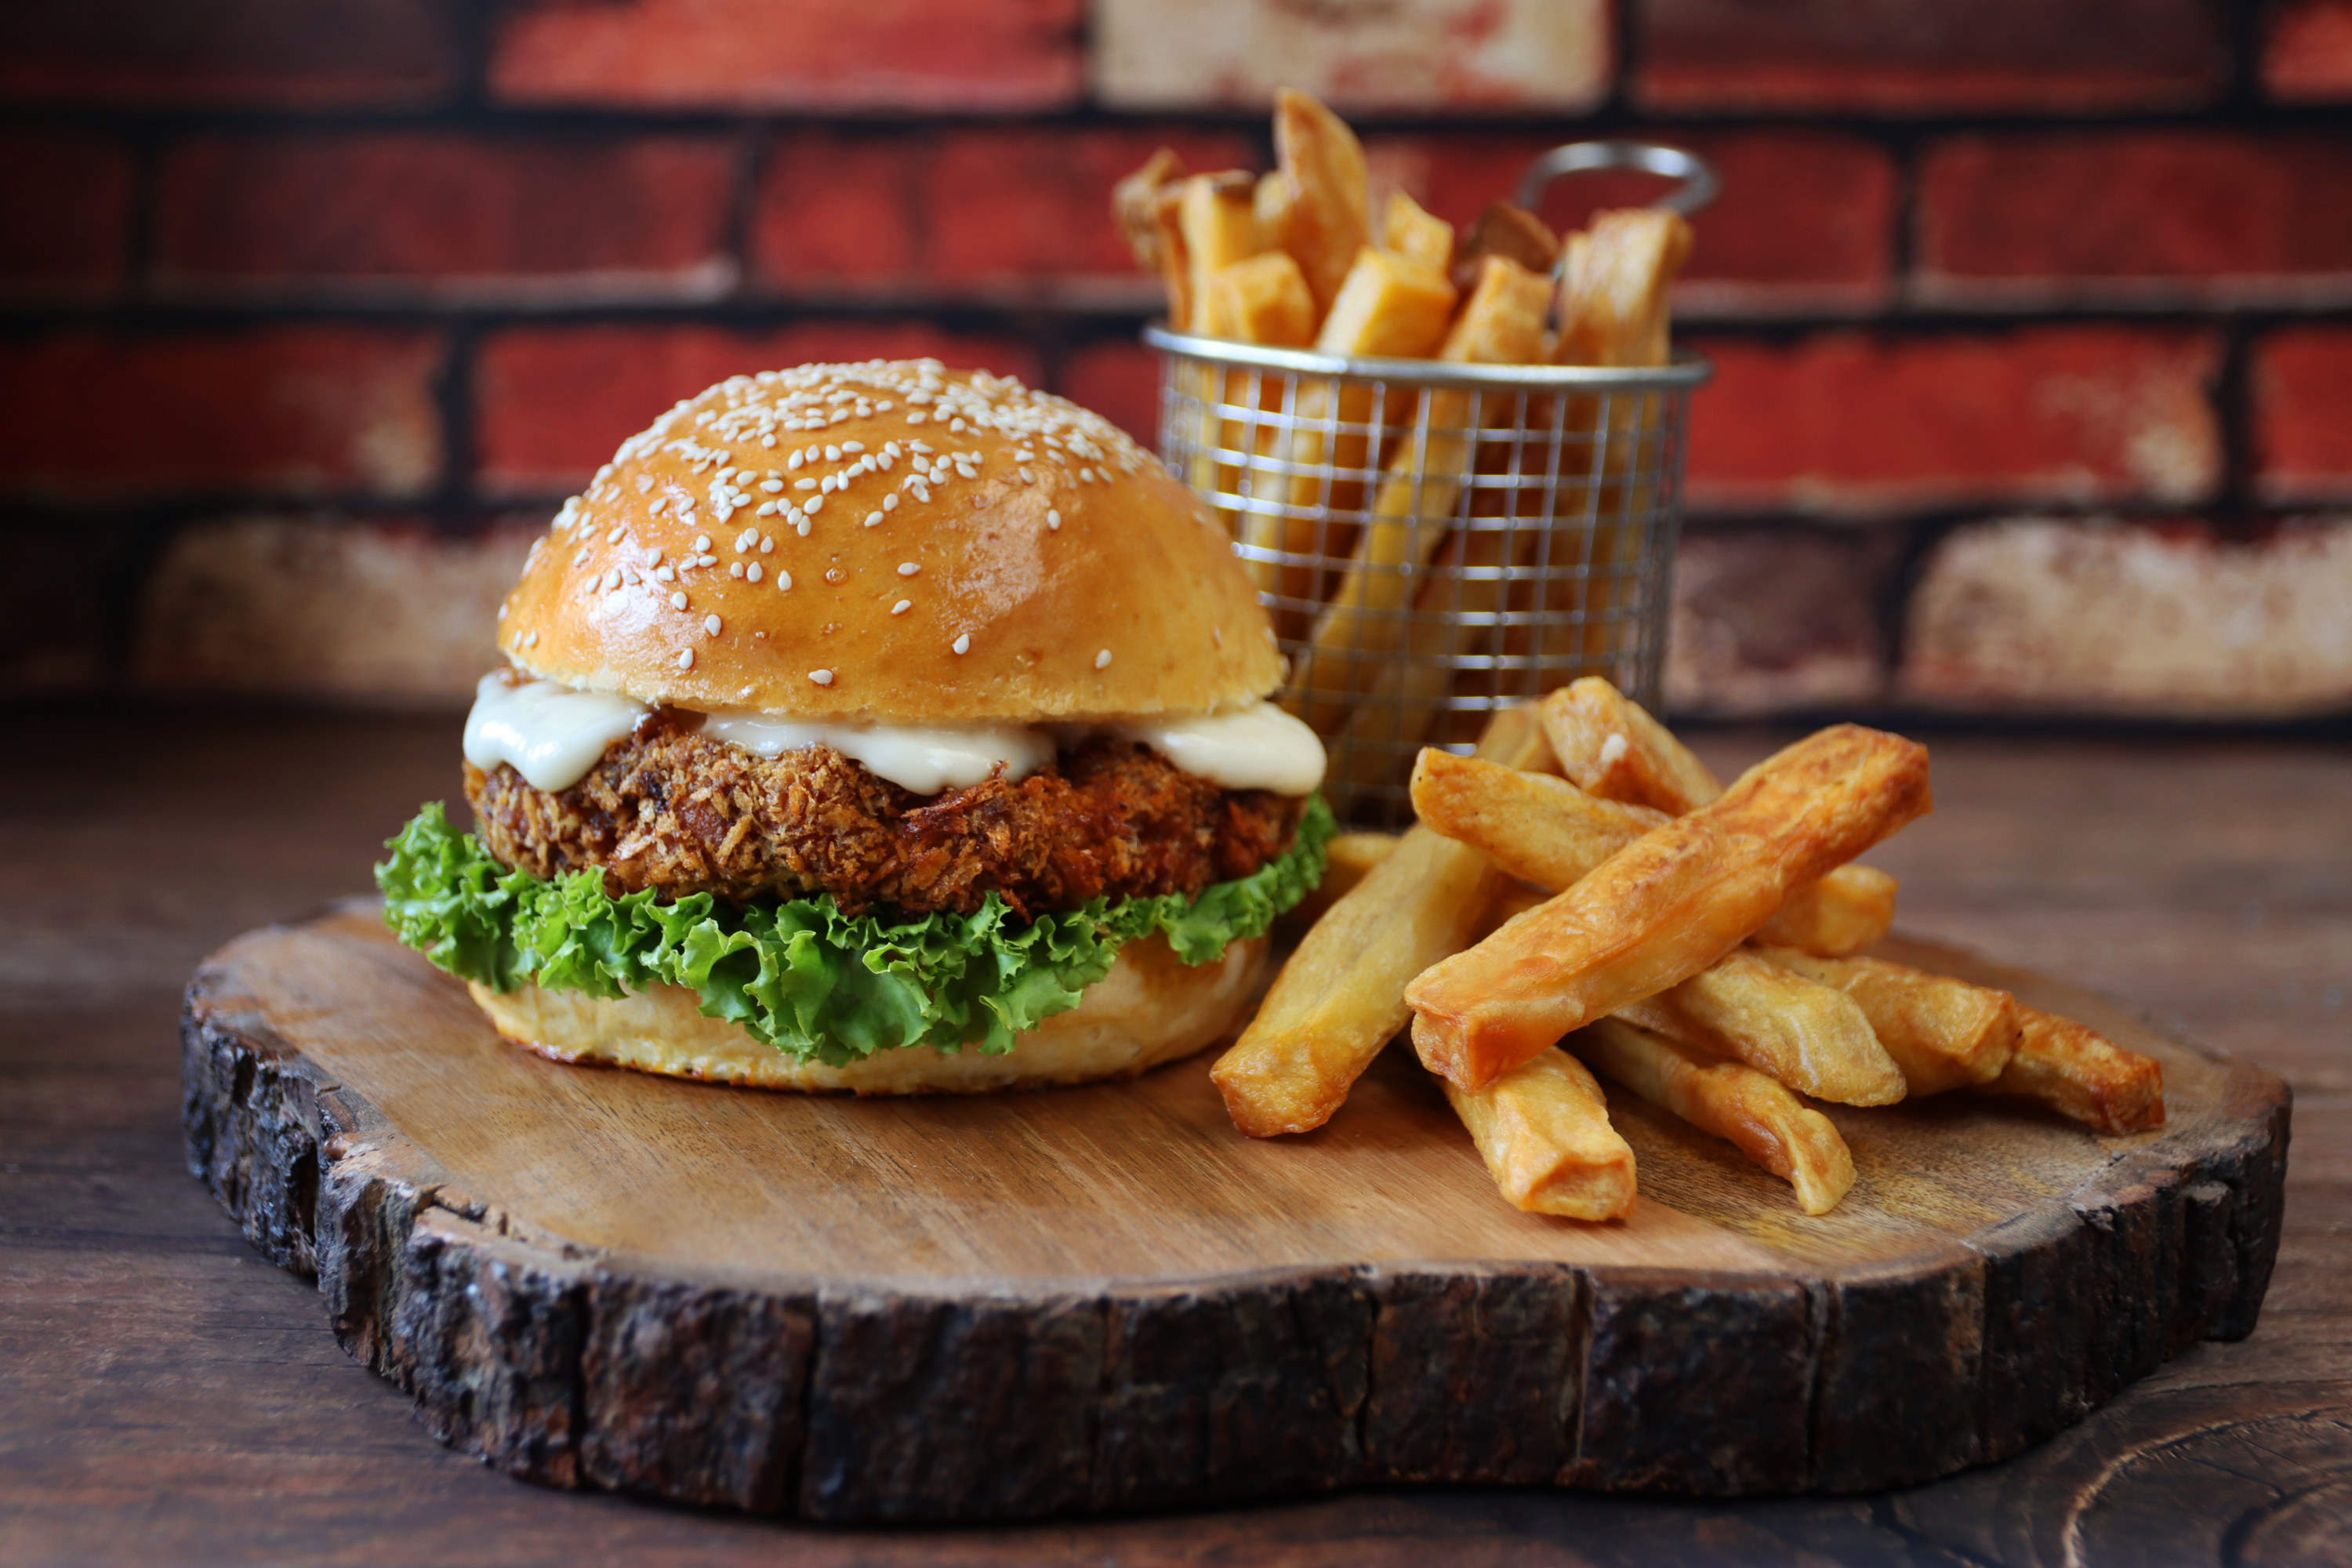 Burger and fries on an ornate wooden serving board